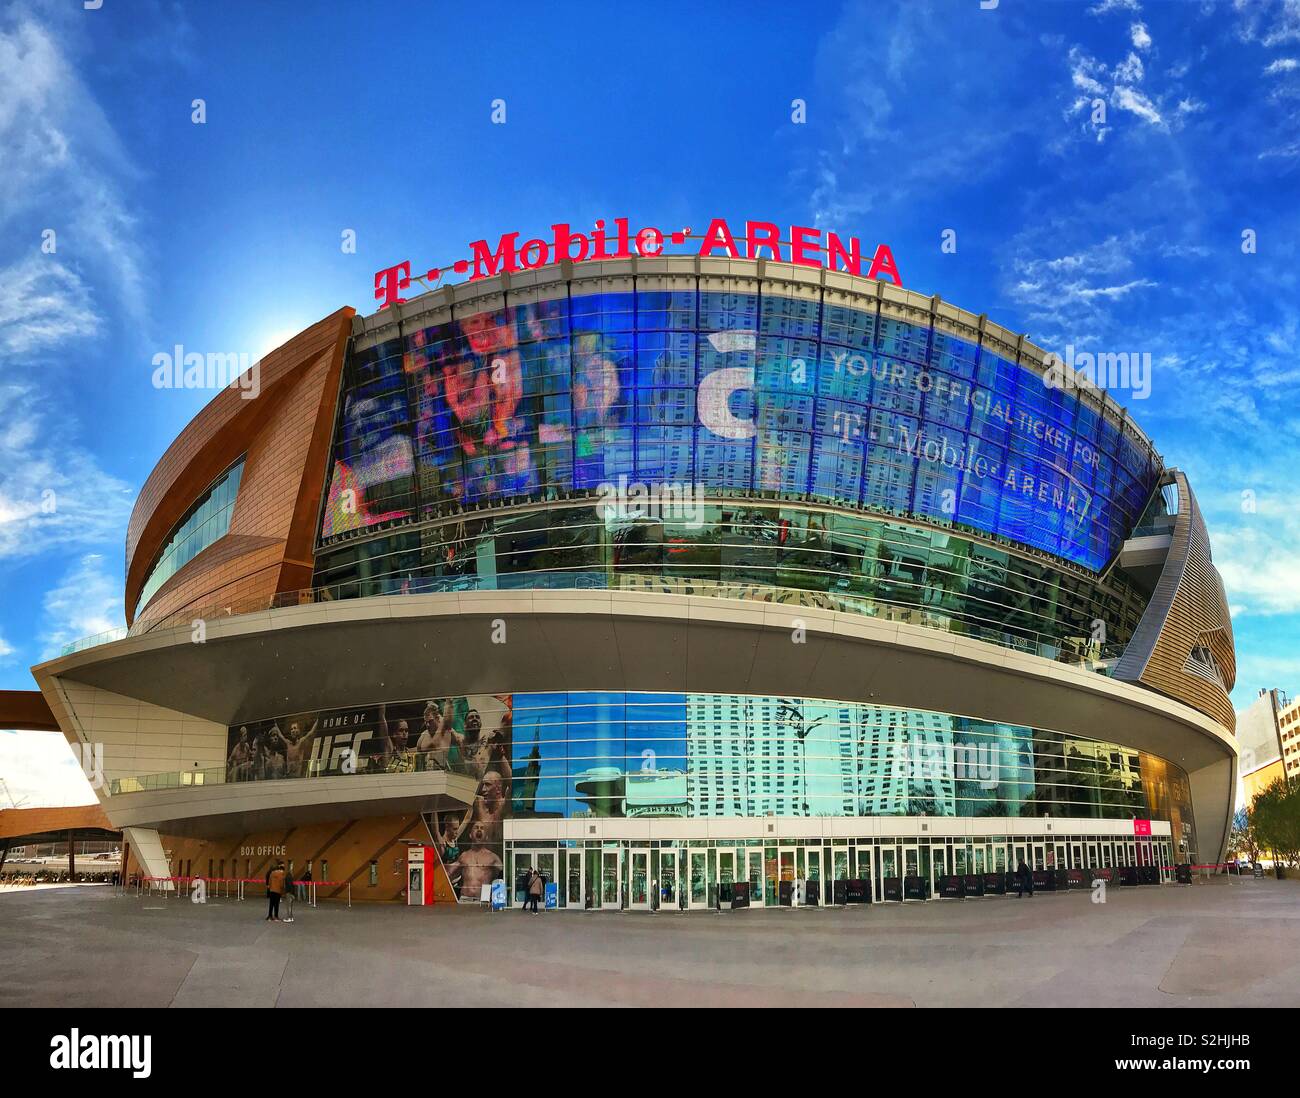 Exterior View of the T Mobile Arena in Las Vegas. Editorial Image